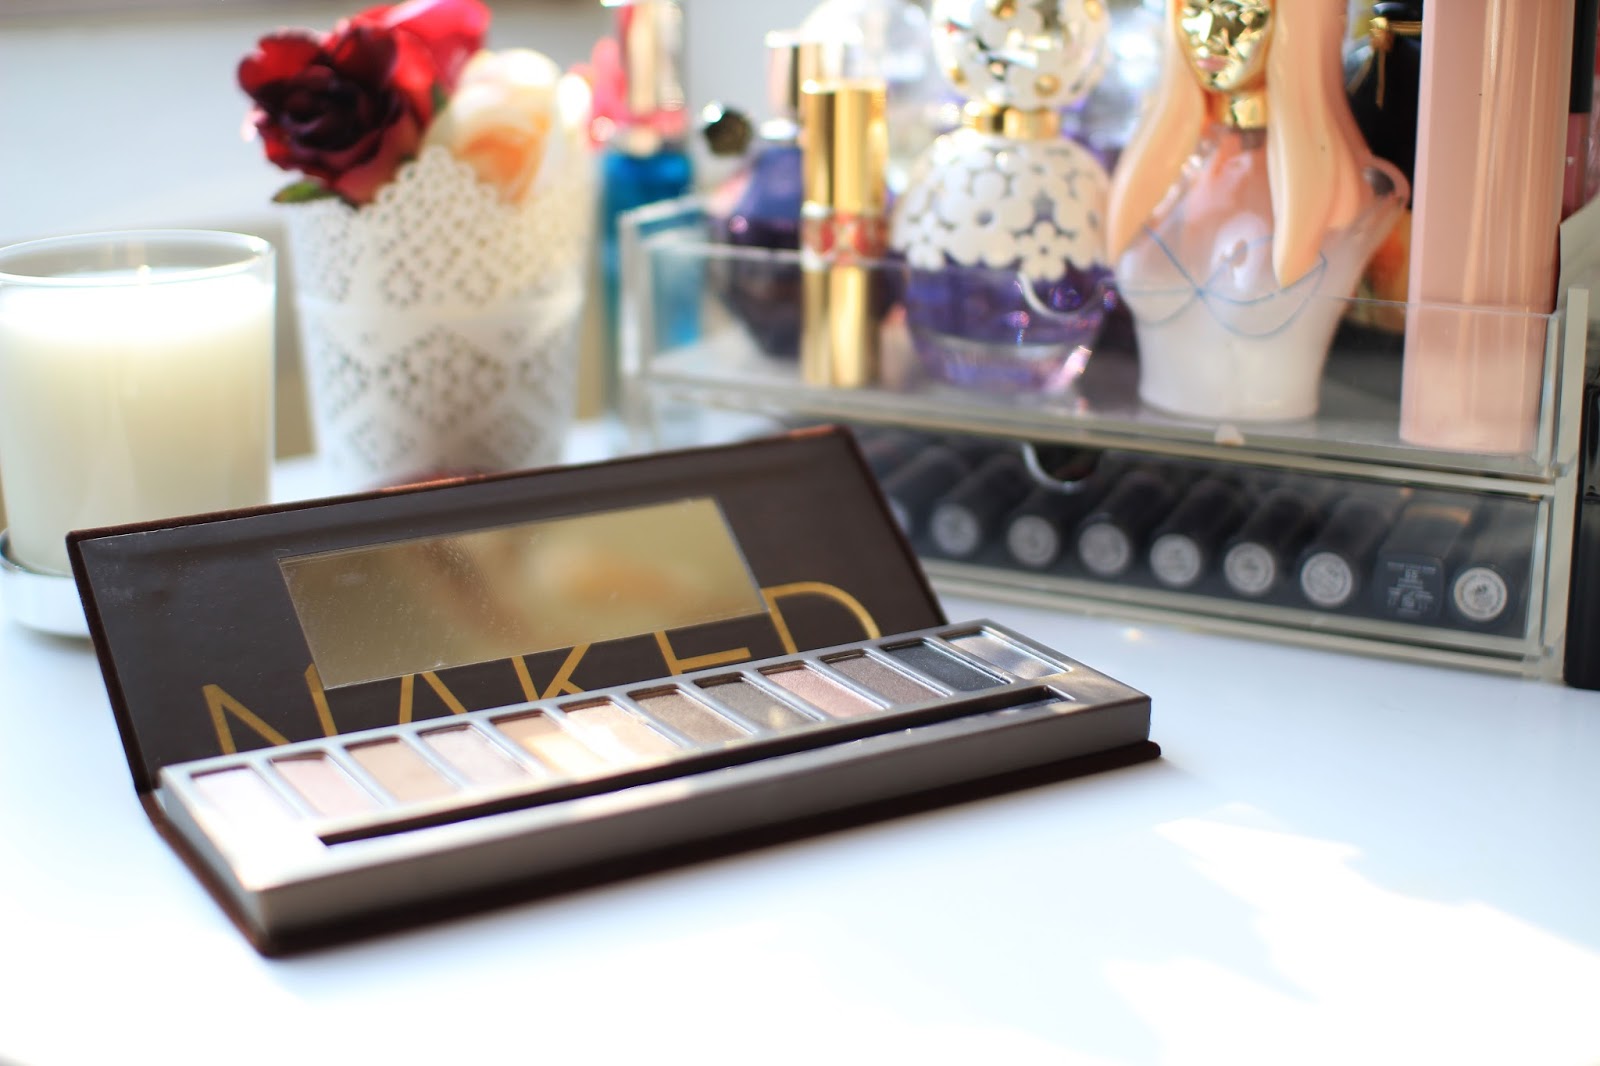 The Urban Decay Naked Palette